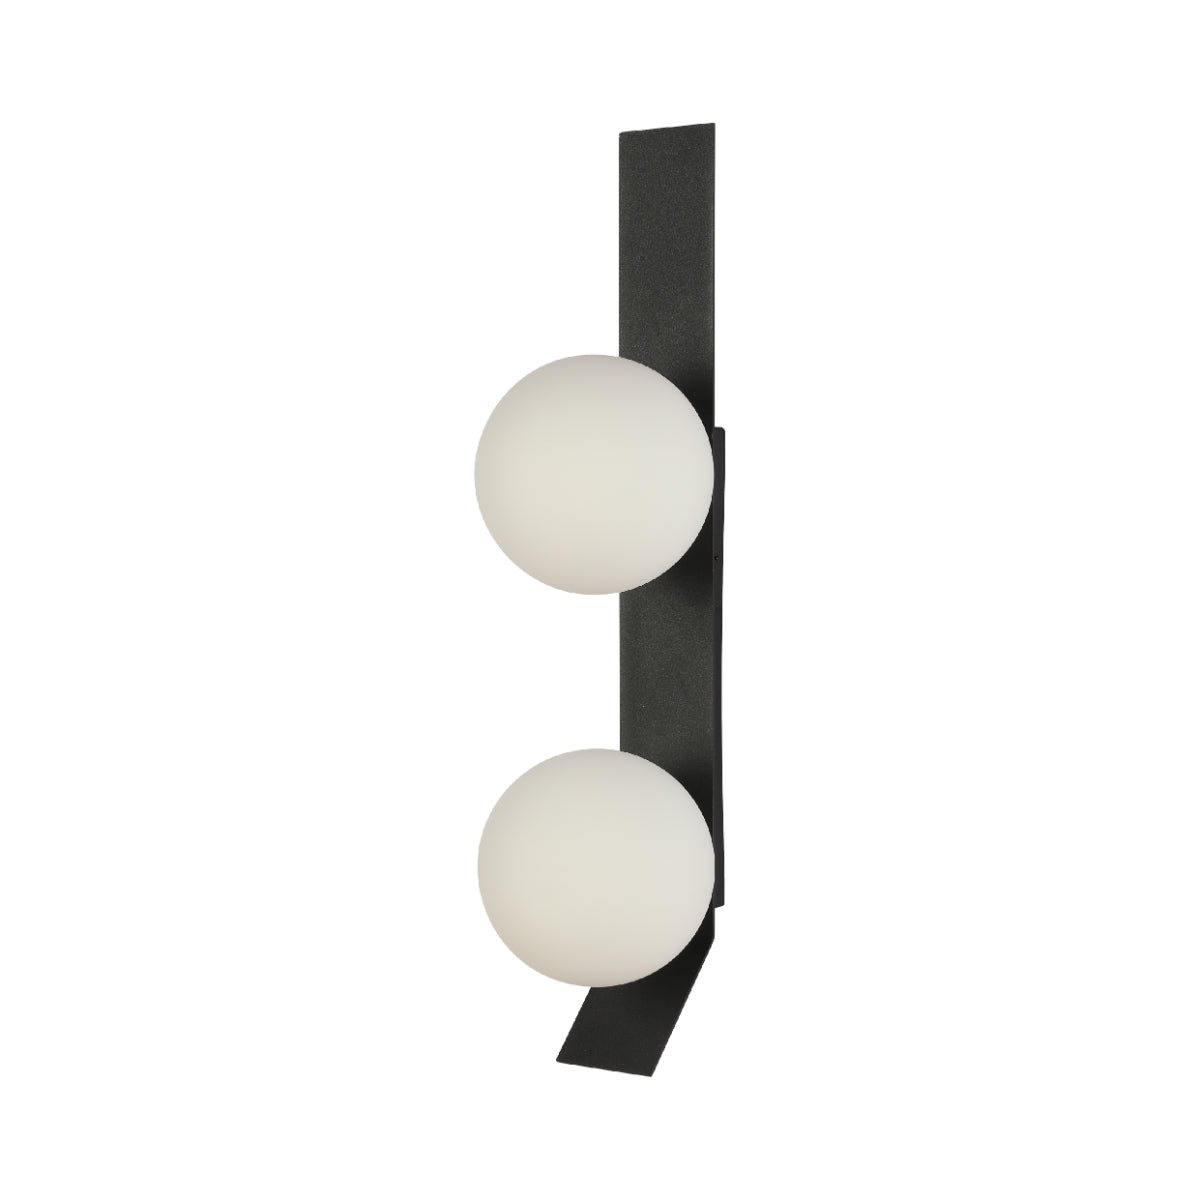 Main image of Contemporary Adjustable Globe Wall Sconce Light 151-19970